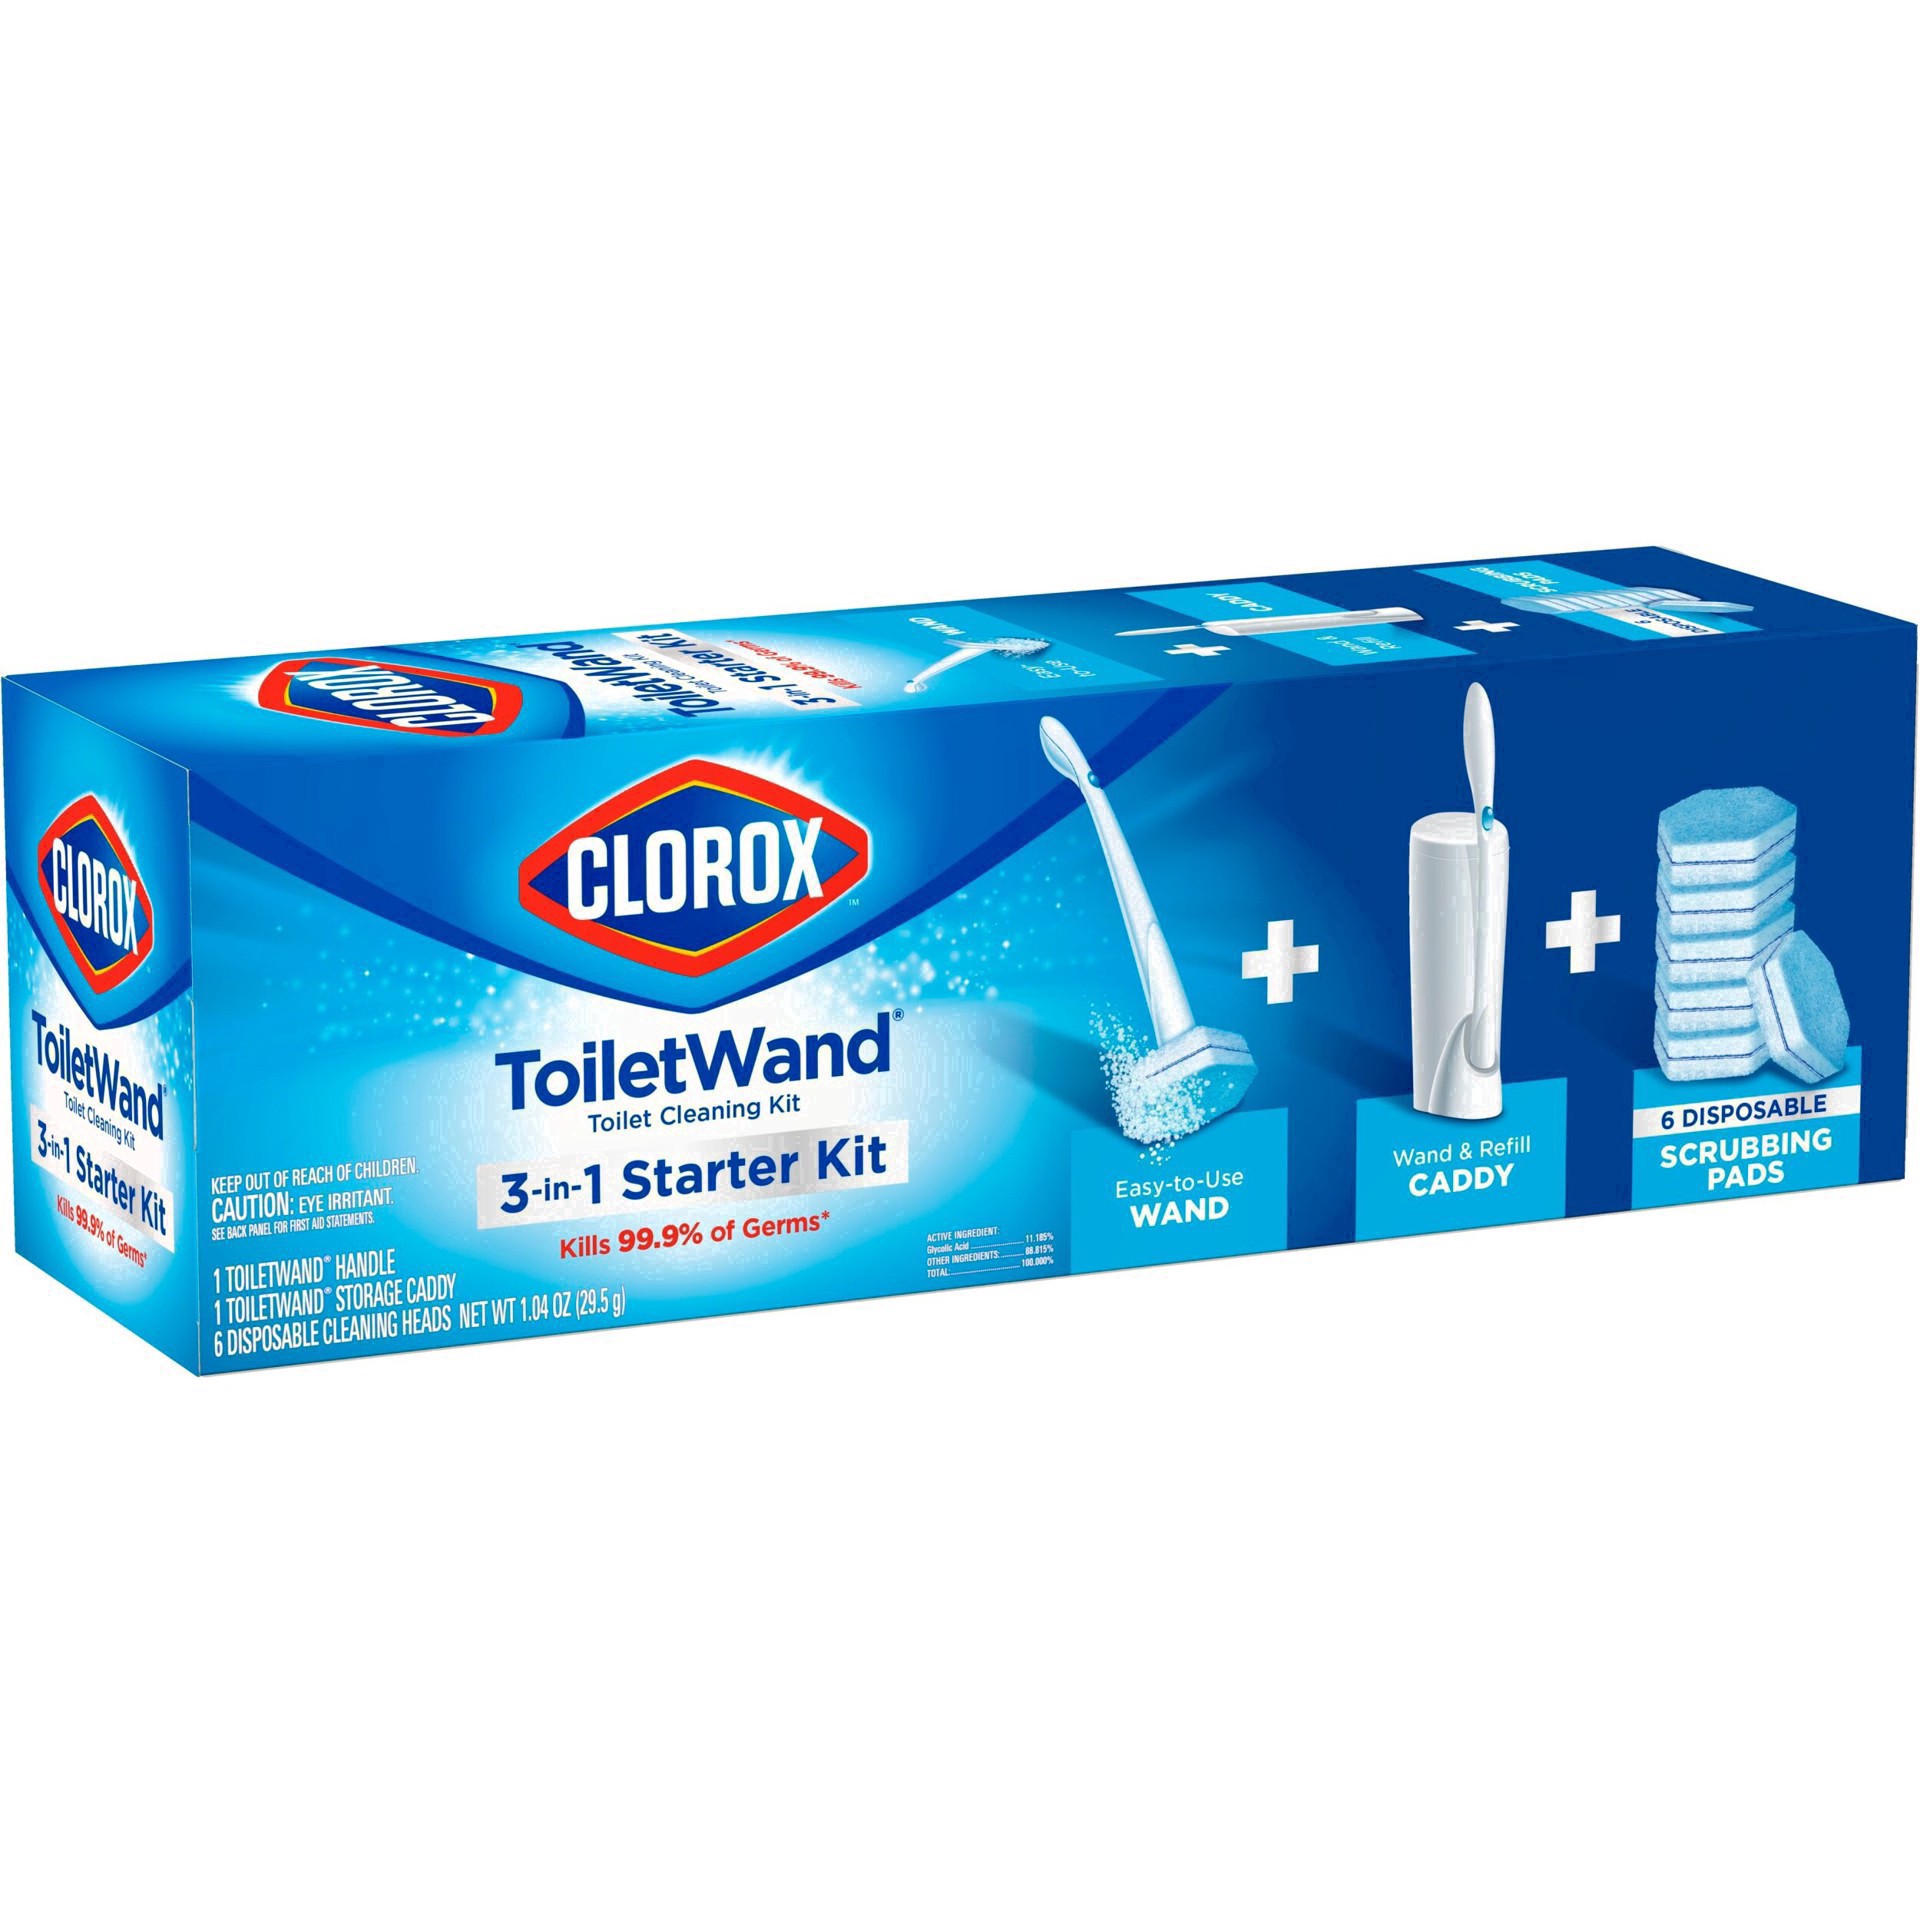 slide 90 of 176, Clorox Toilet Wand 3-in-1 Starter Toliet Cleaning Kit, 1 ct